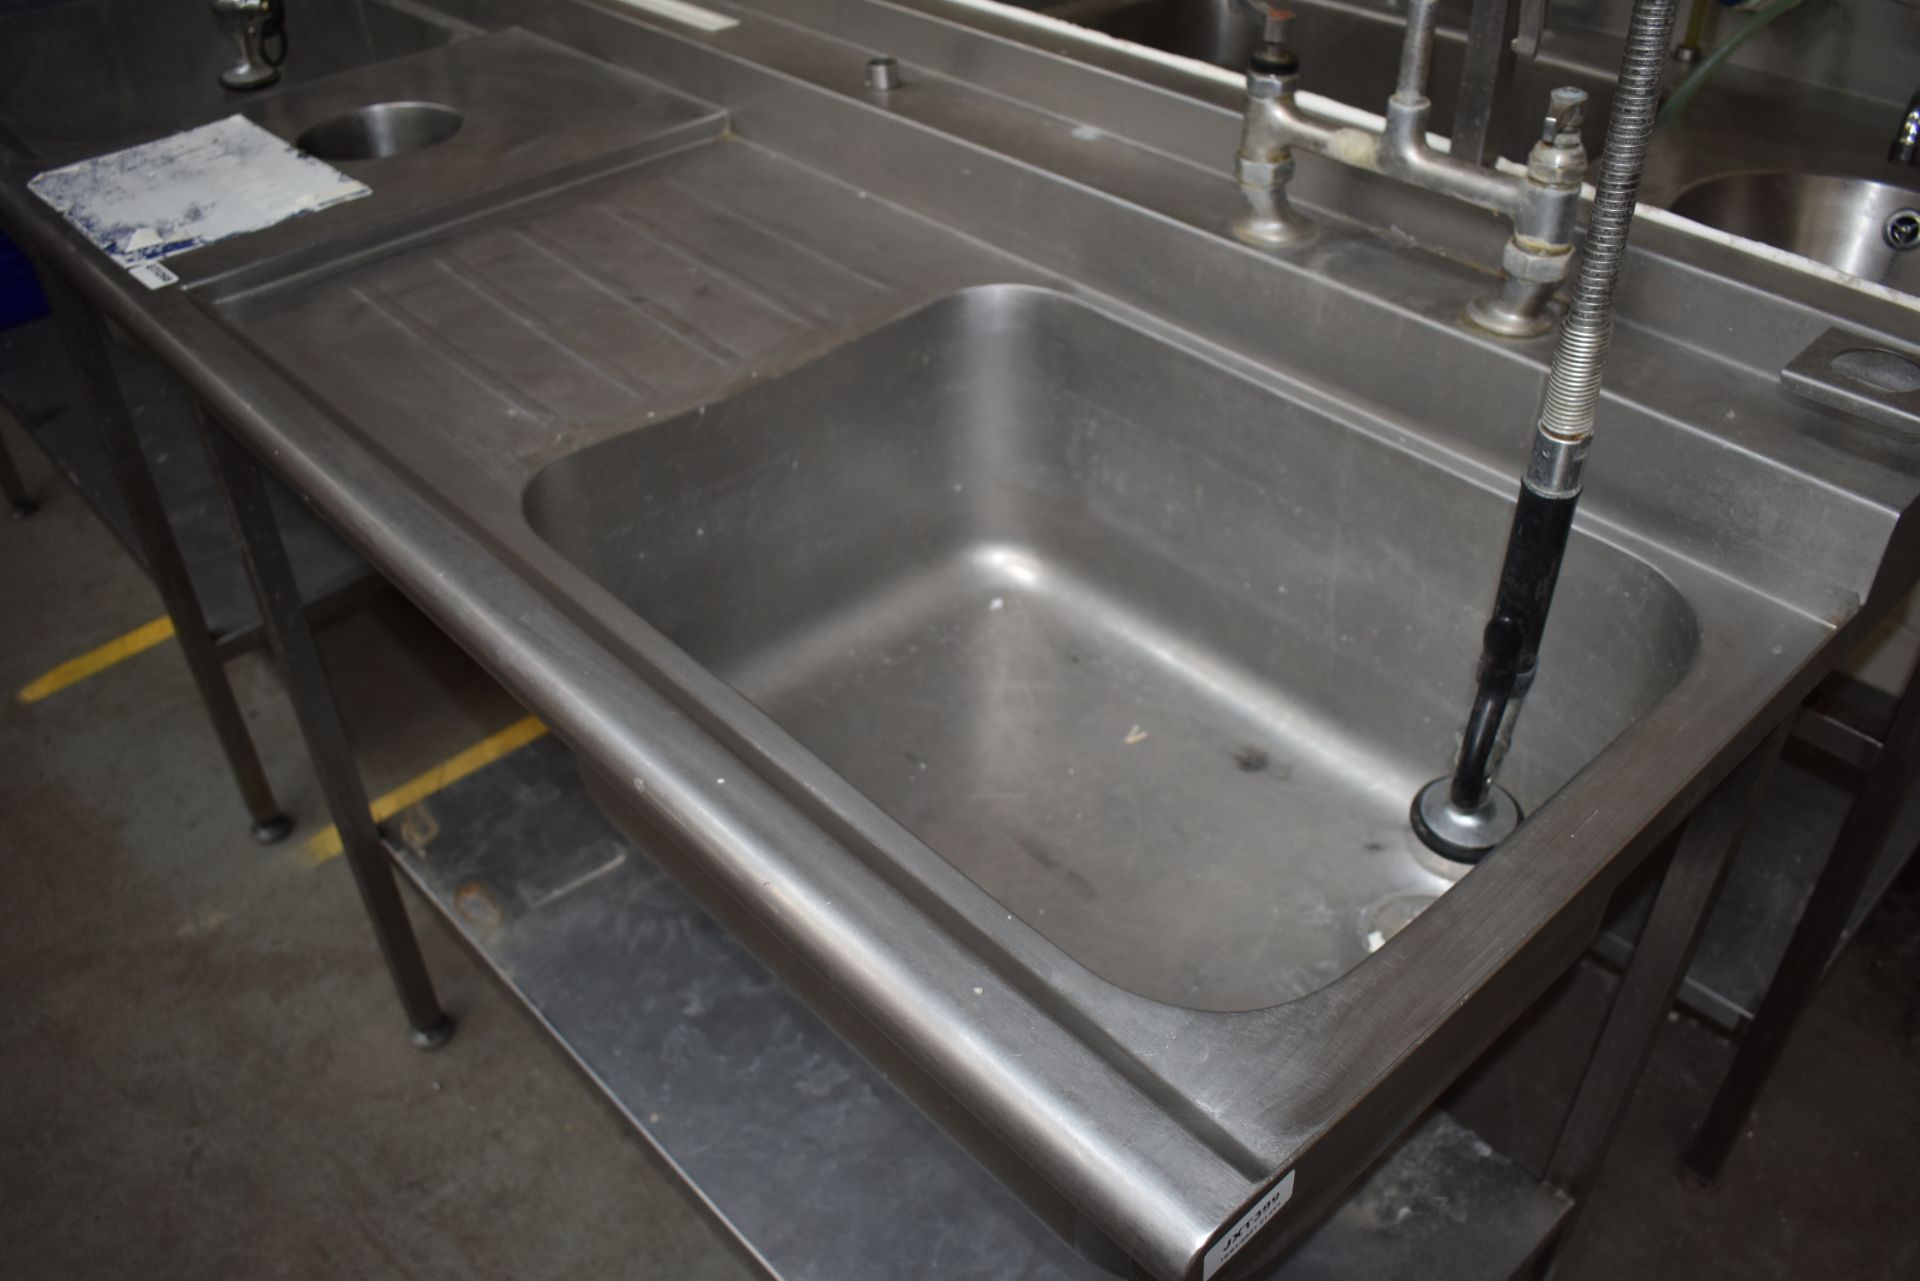 1 x Stainless Steel Commercial Wash Basin Unit With Twin Sink Bowl and Drainers, Mixer Taps, Spray - Image 12 of 12